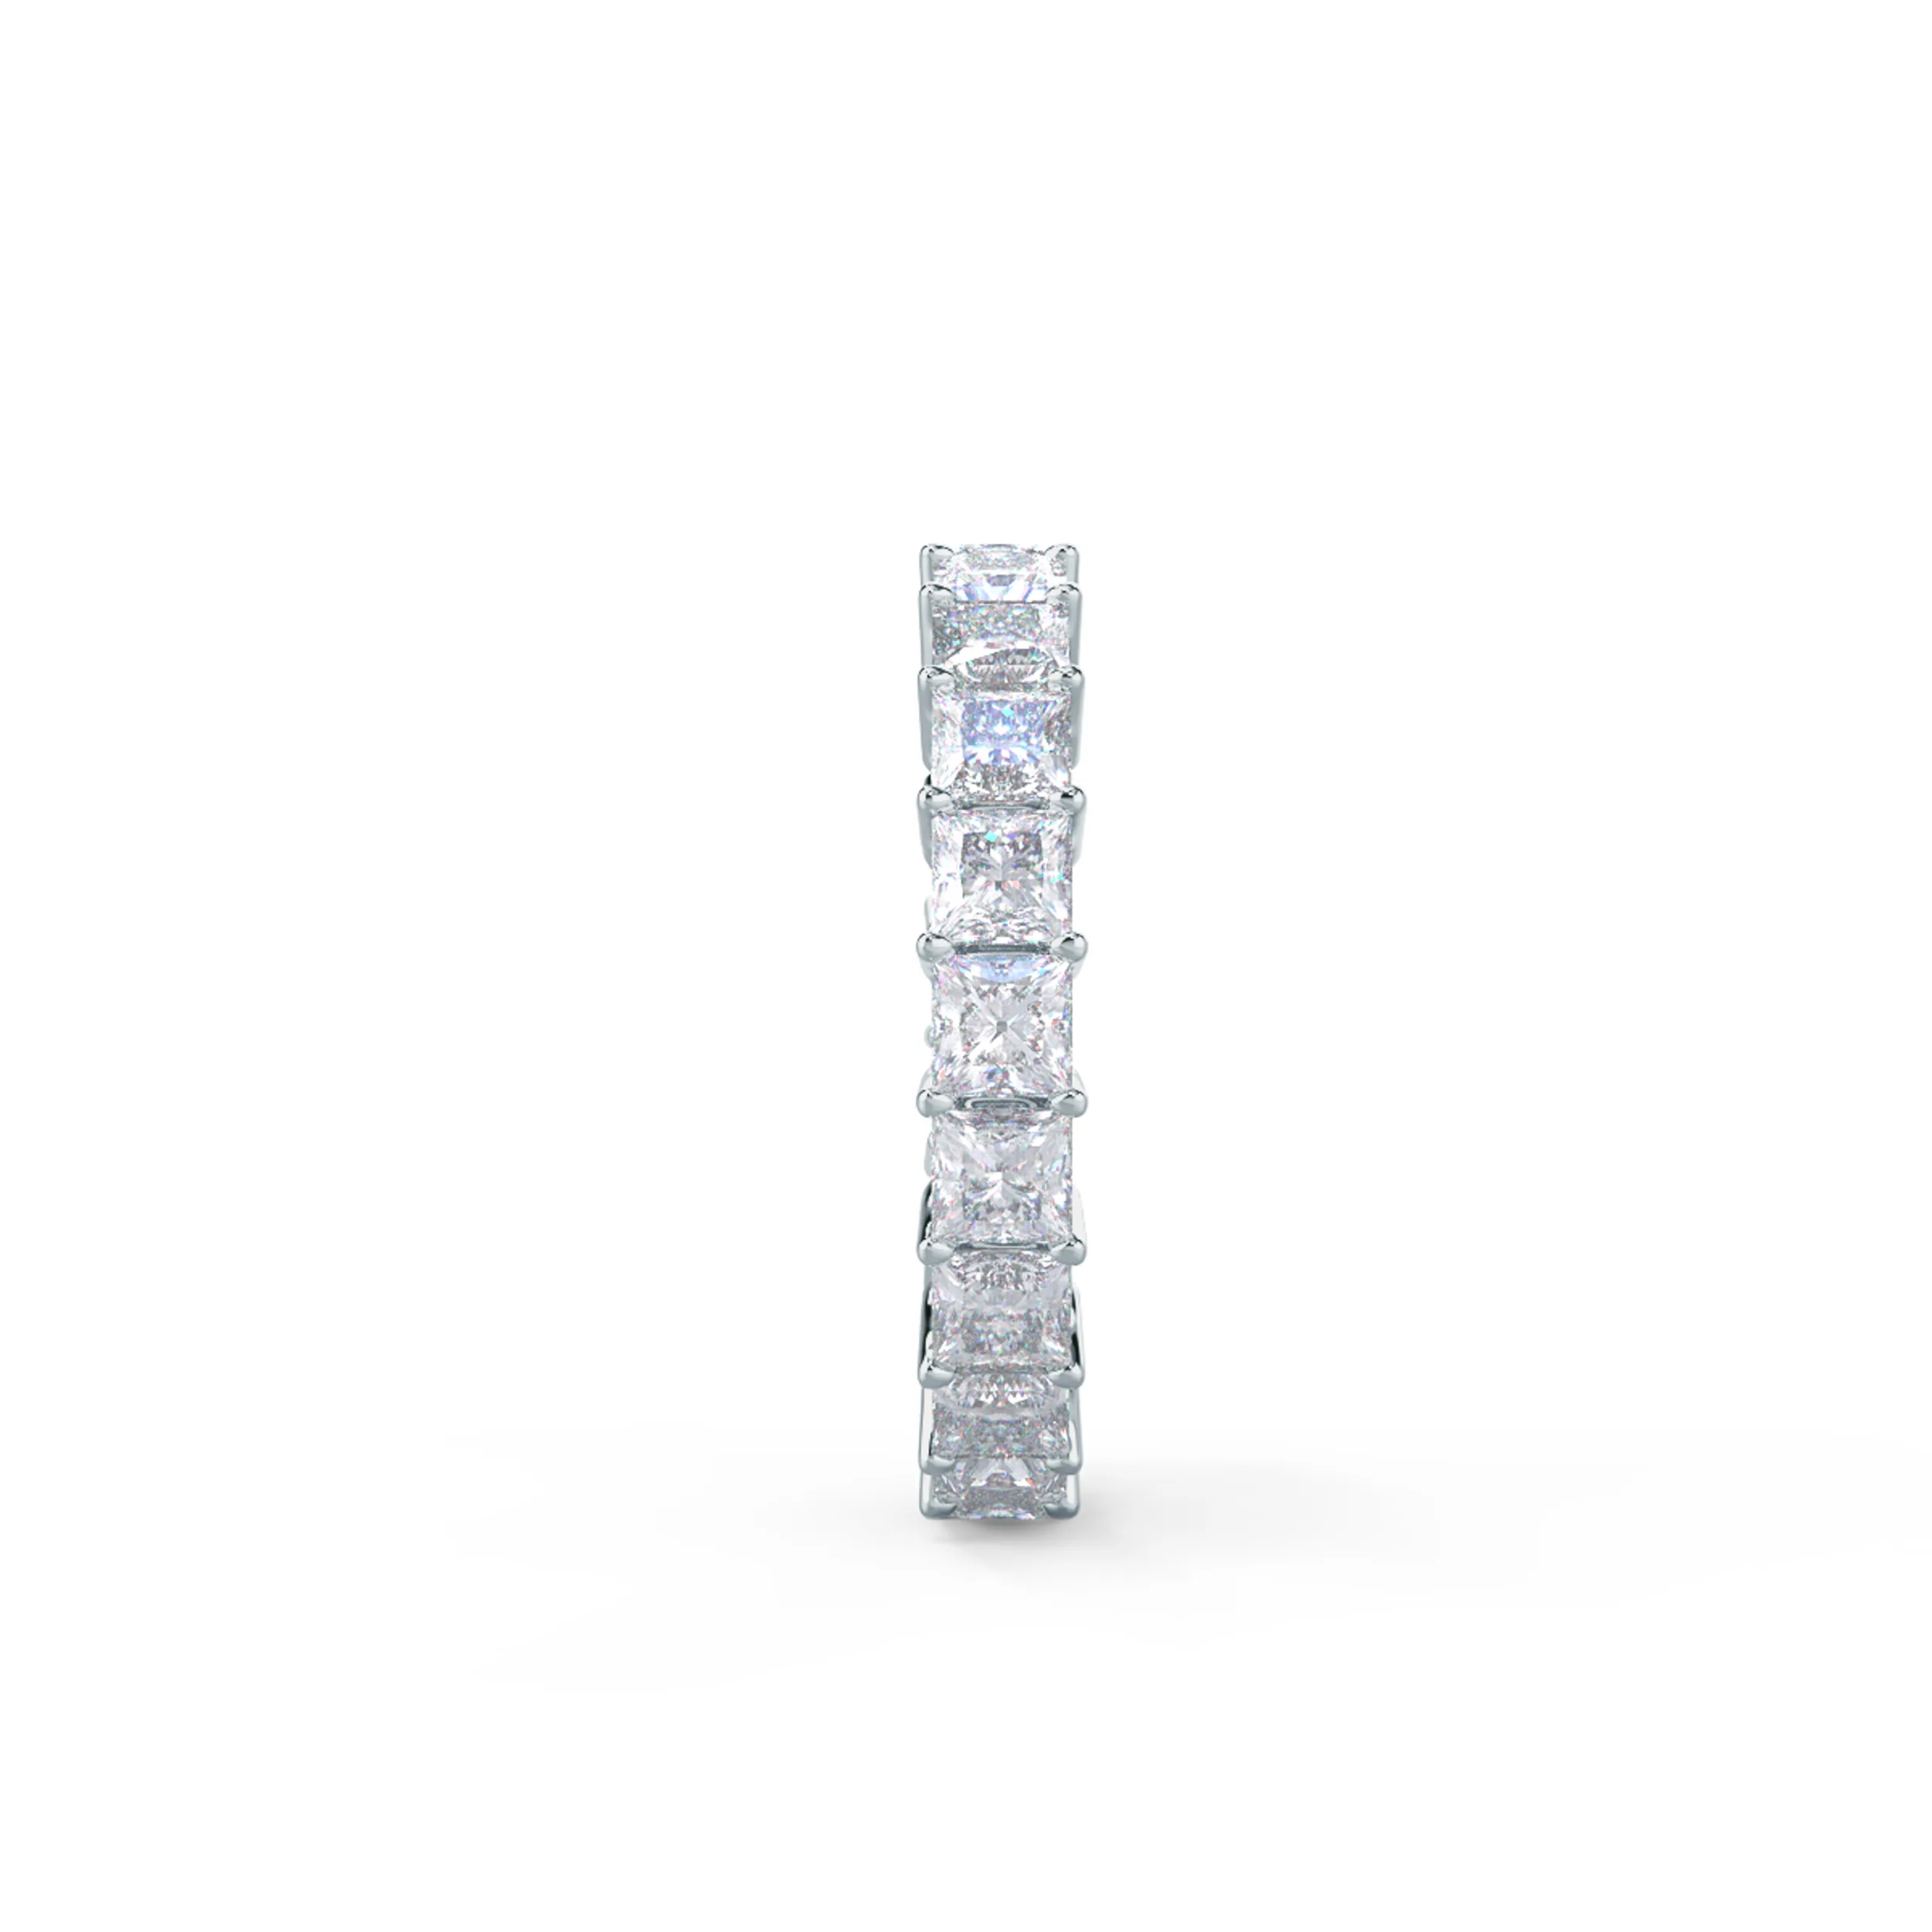 White Gold Princess Eternity Band featuring Hand Selected 4.0 ct Lab Diamonds (Side View)